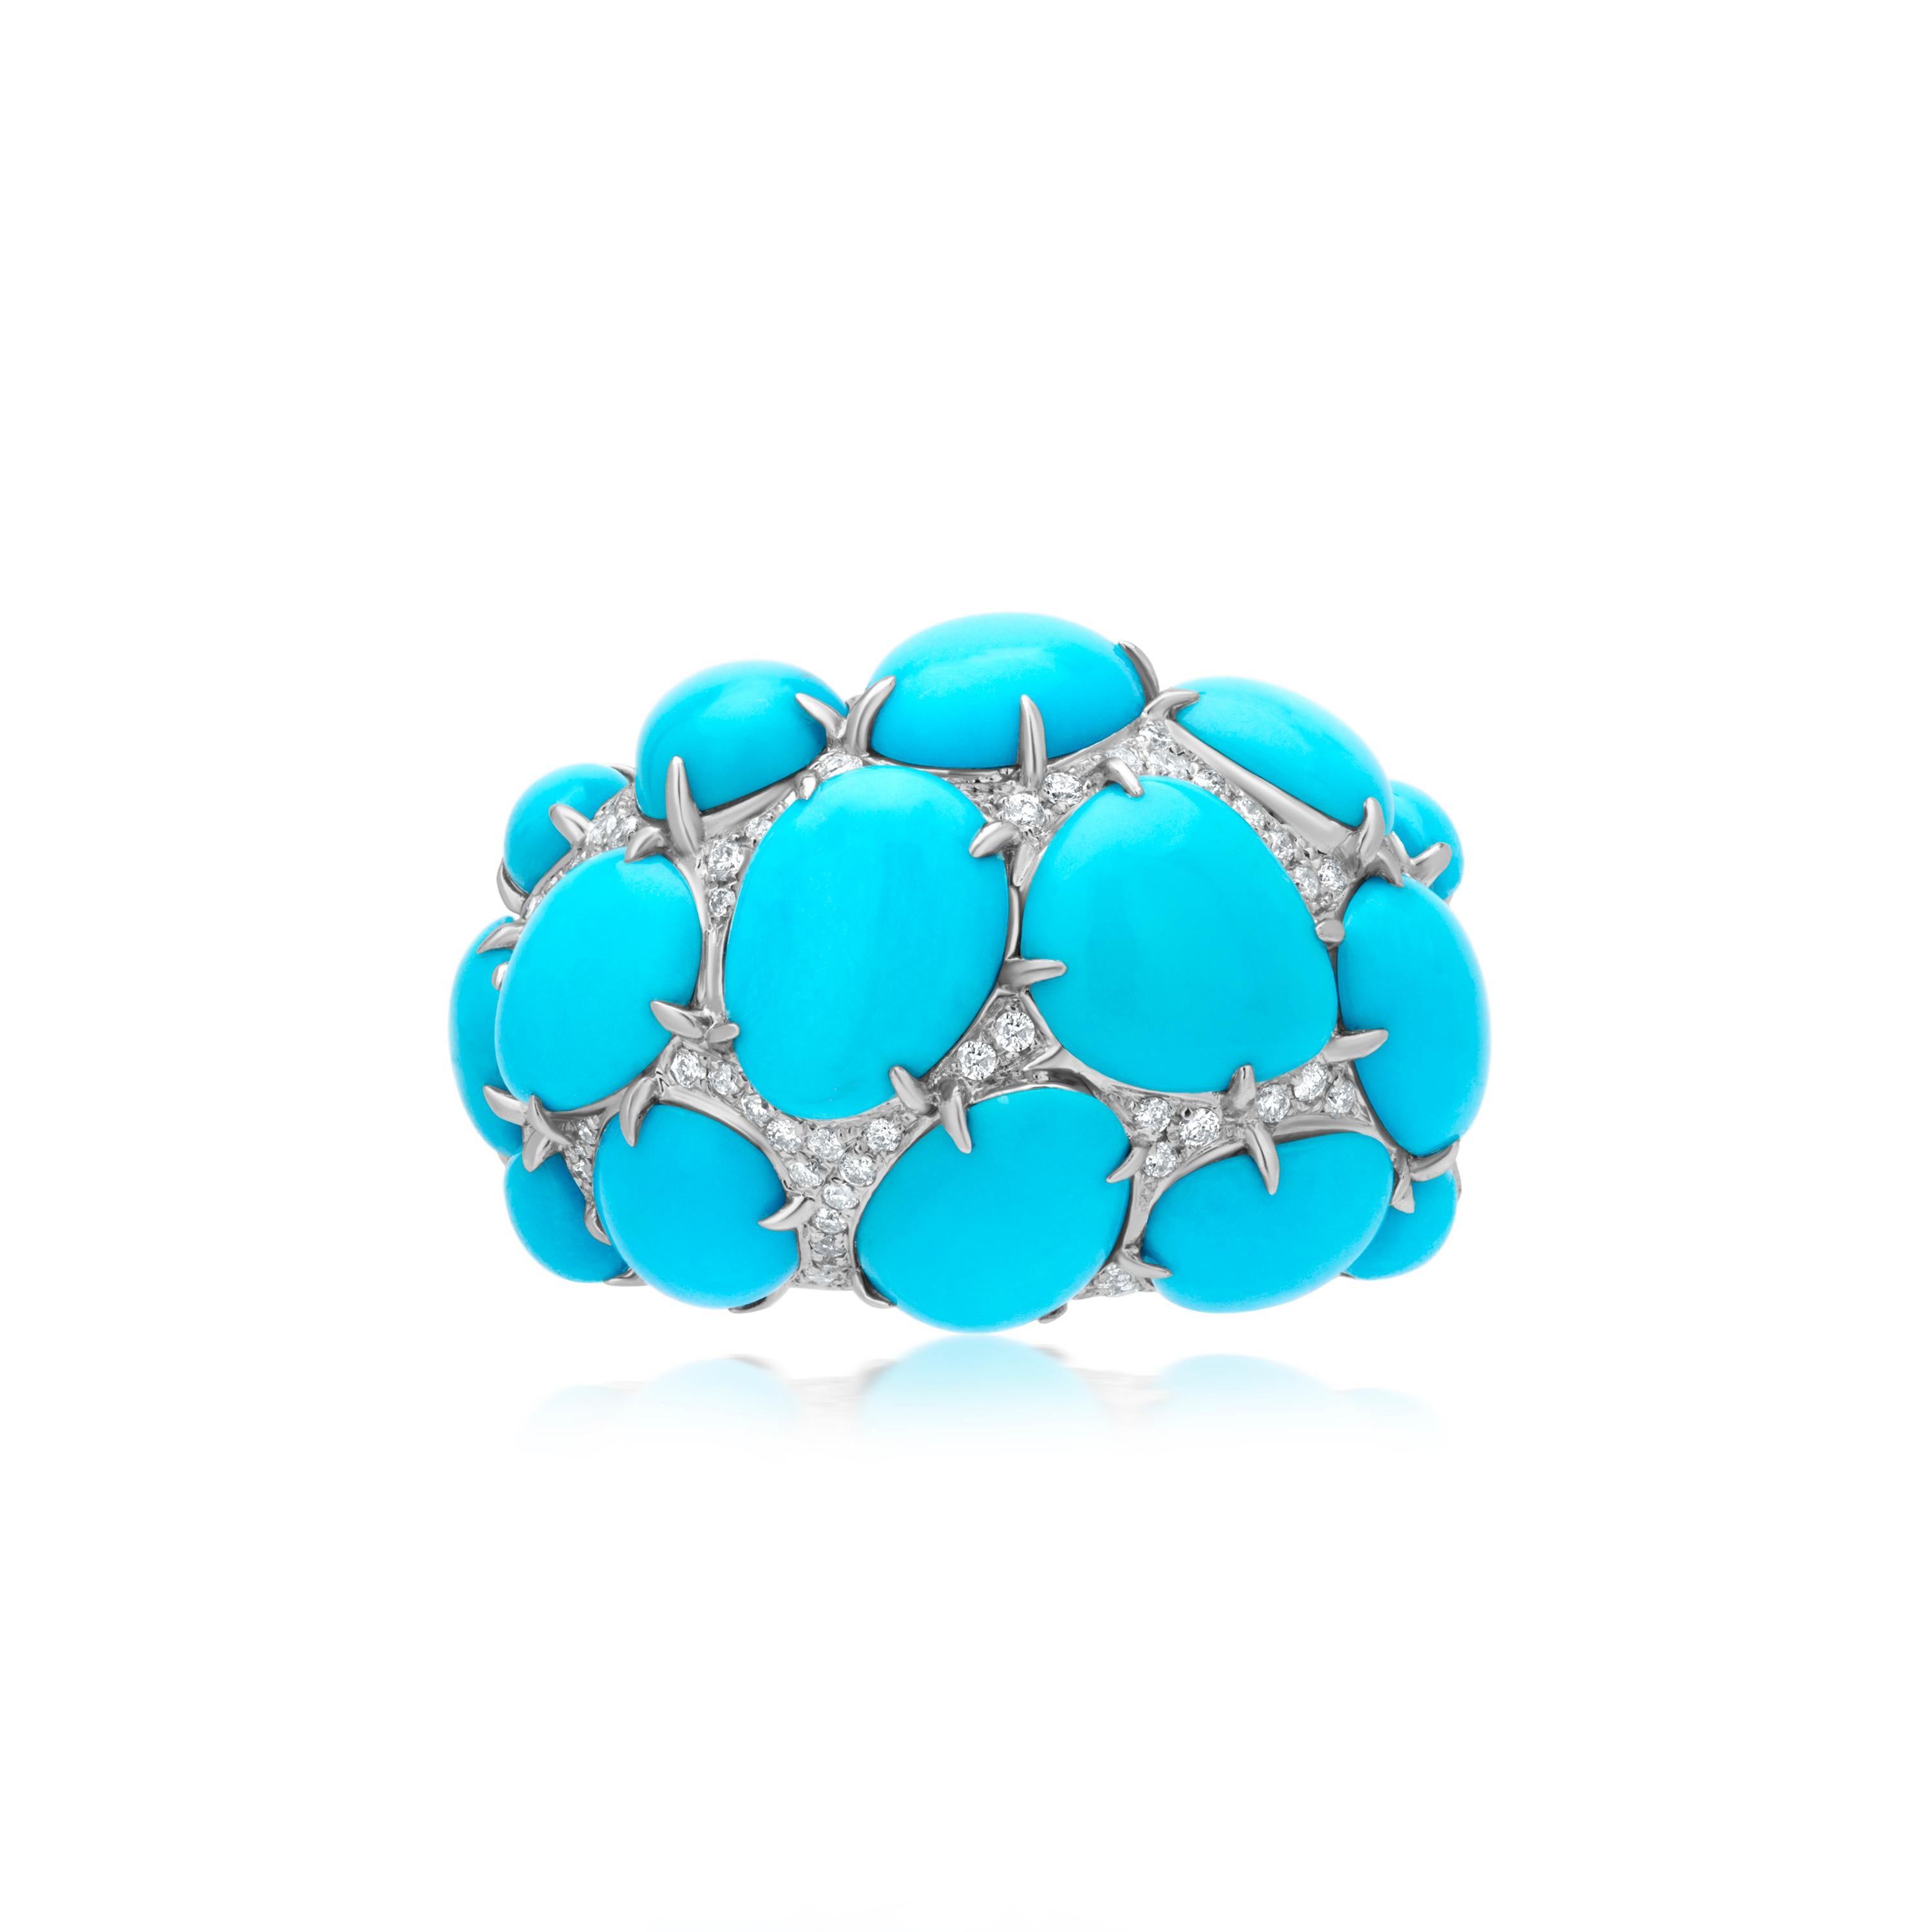 This Gemistry 18K White Gold ring is dotted with twelve pear and oval-cabochon Turquoise stones in a prong setting. The crevices between the blue beauties are filled with round full-cut white diamonds. The diamonds are I1 in clarity and GH in color,